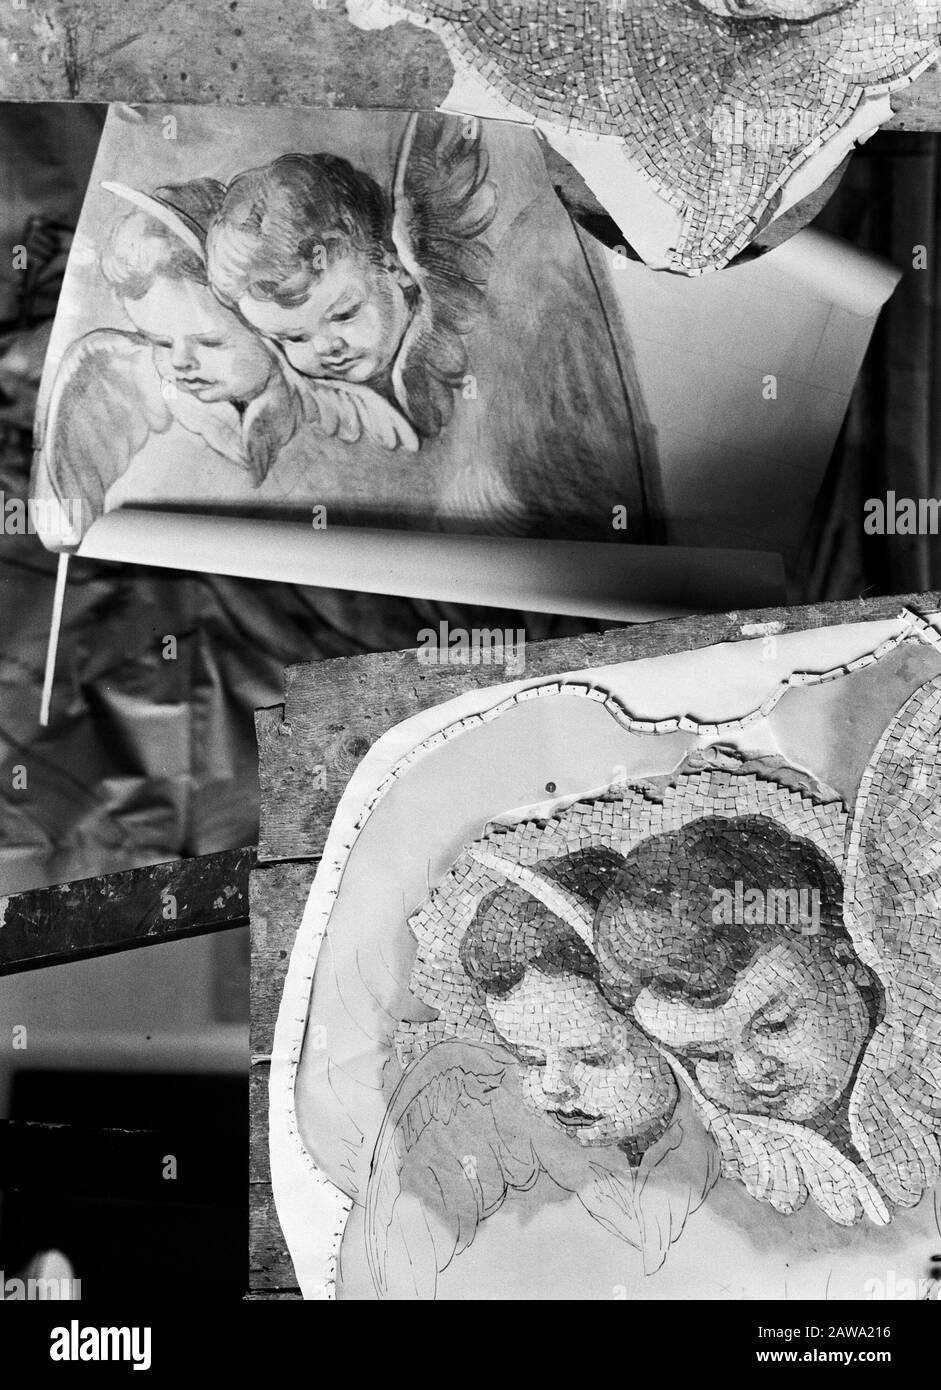 Rome: Papal mosaic studio in Vatican City  Mosaic nascent surmounted the sample Date: December 1937 Location: Italy, Rome, Vatican City Keywords: workshops, mosaics, religious art  : Poll, Willem van de Copyright Holder: National Archives Material Type: Glass Negative archival inventory number: see access 2.24.14.02 Stock Photo